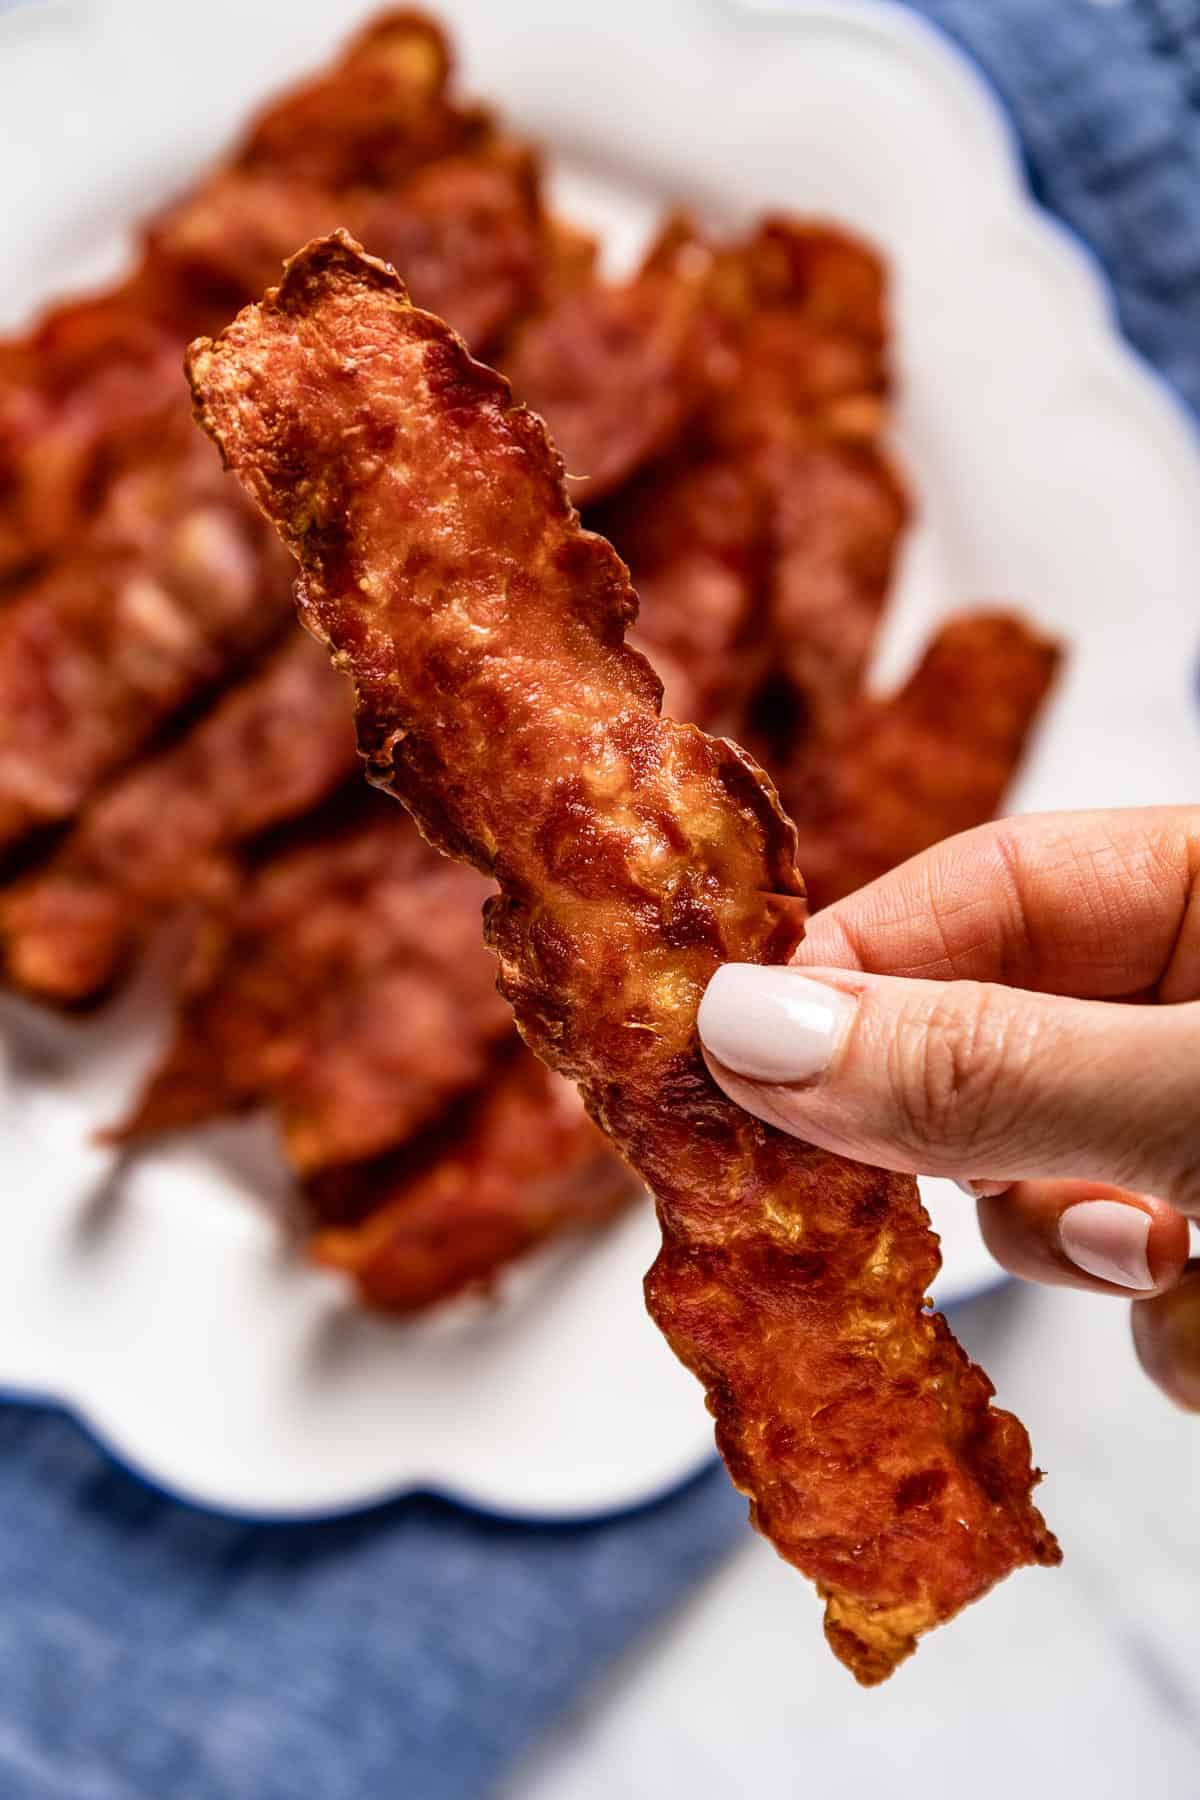 Crispy turkey bacon cooked in air fryer is held by a woman